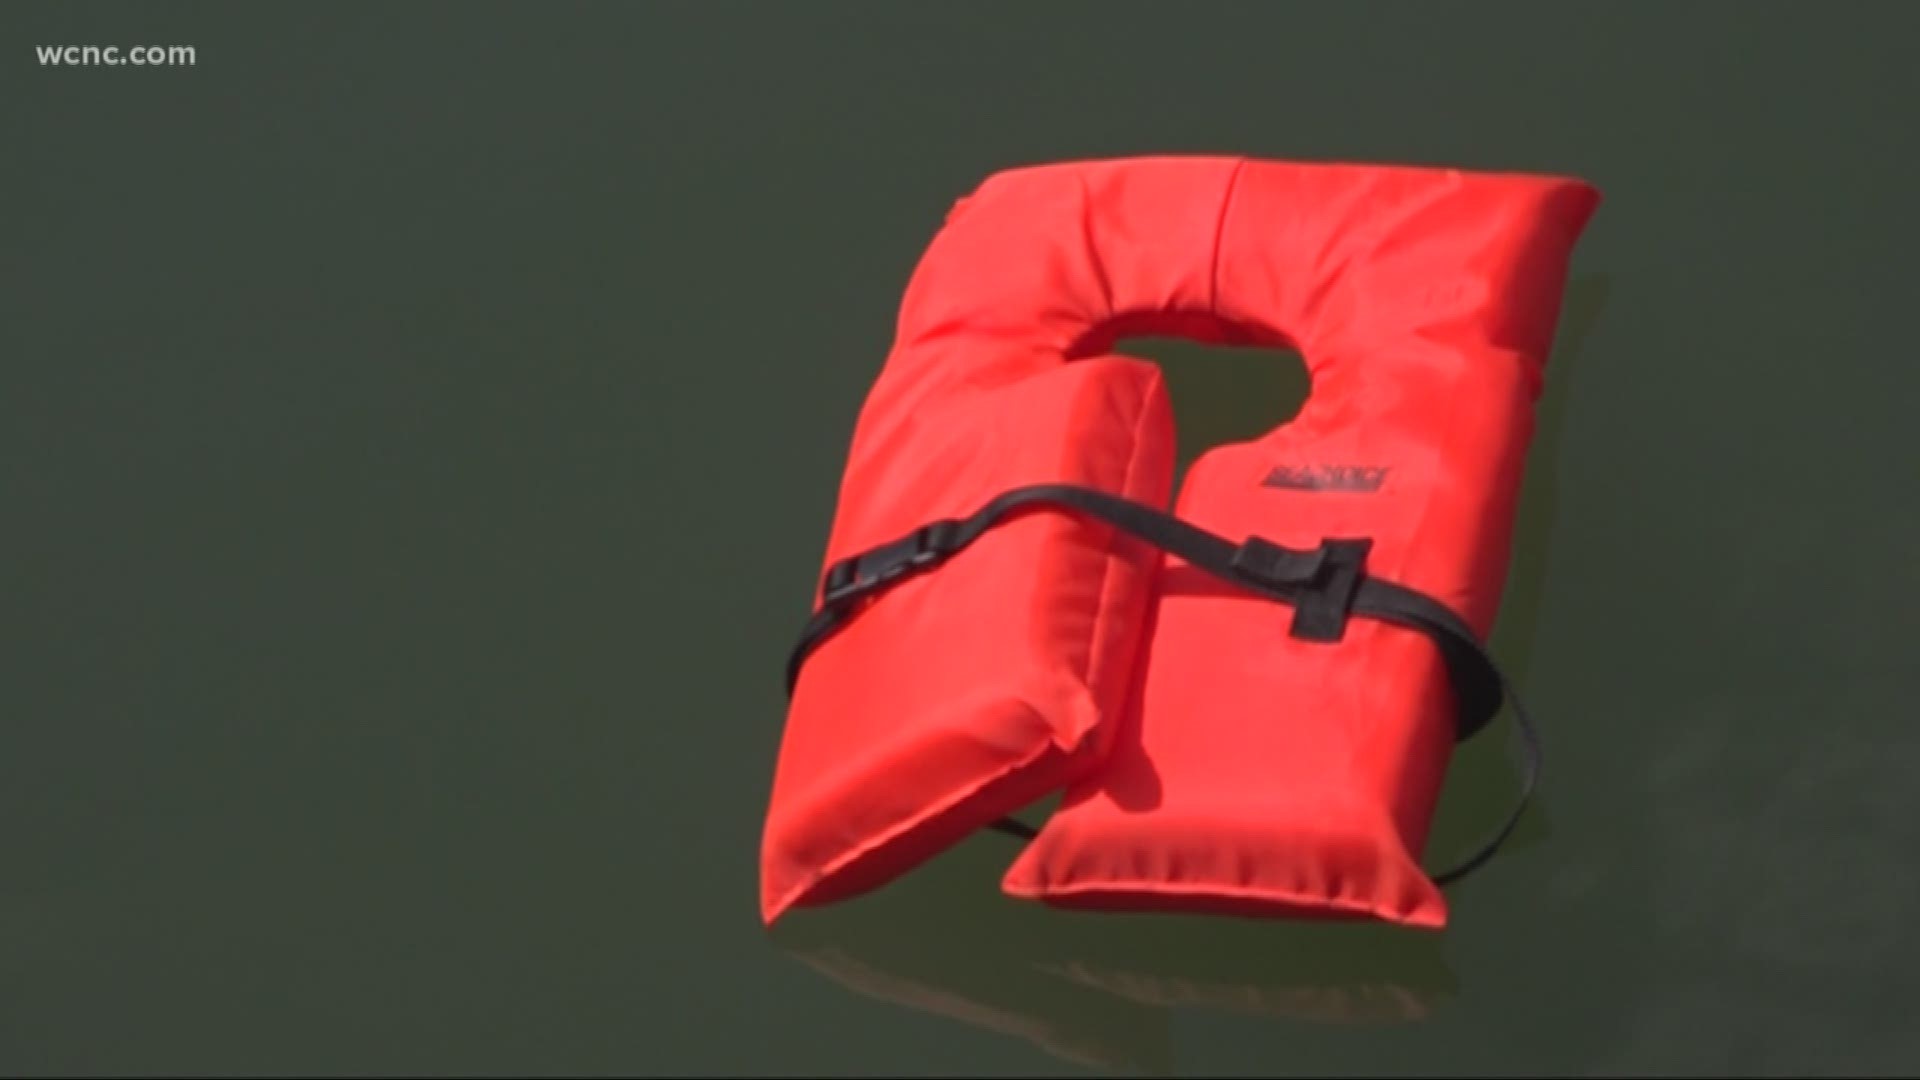 Life jackets do not last forever and it is important to check them every season. Take a good look at your life jackets, look if there are any wear and tear and any crushing of the foam that could lessen the buoyancy of the life jacket.